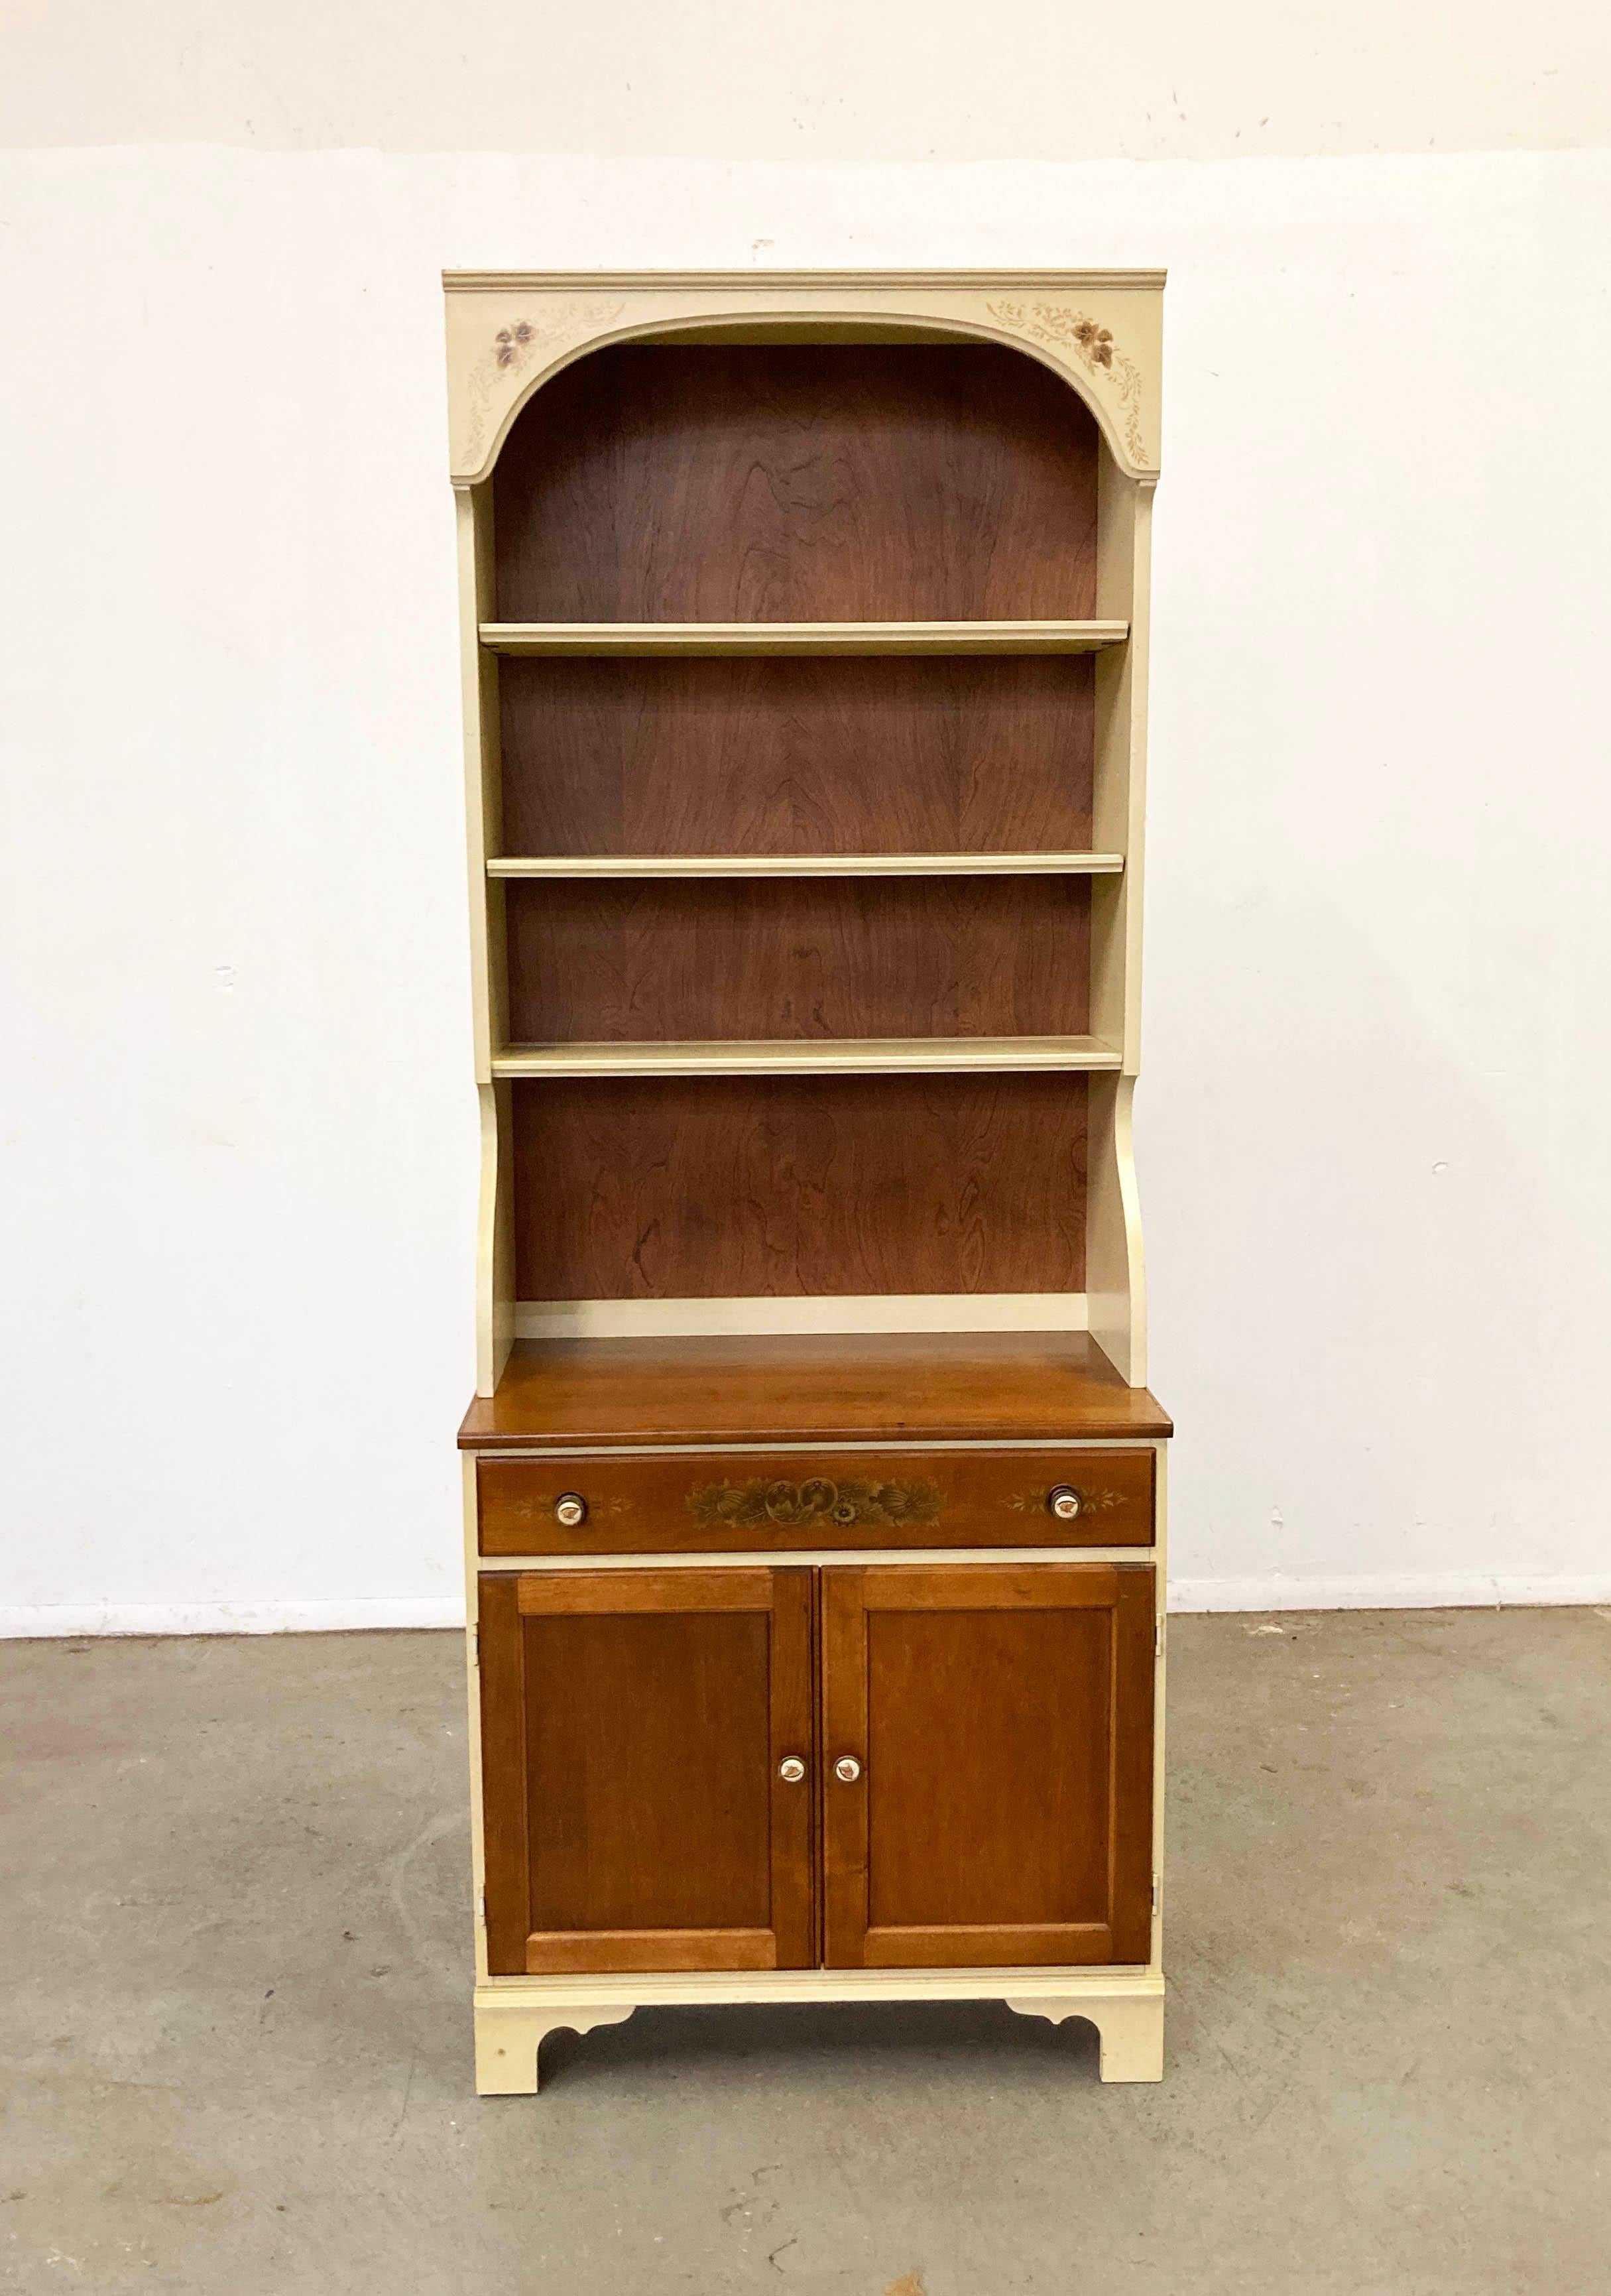 Offered is a vintage two-piece hardwood cherry cabinet/bookshelf made by Lambert Hitchcock. Includes a hutch top with shelving and a bottom cabinet with one top drawer and inner shelving. Features beautiful stenciling and hardware. It is in good